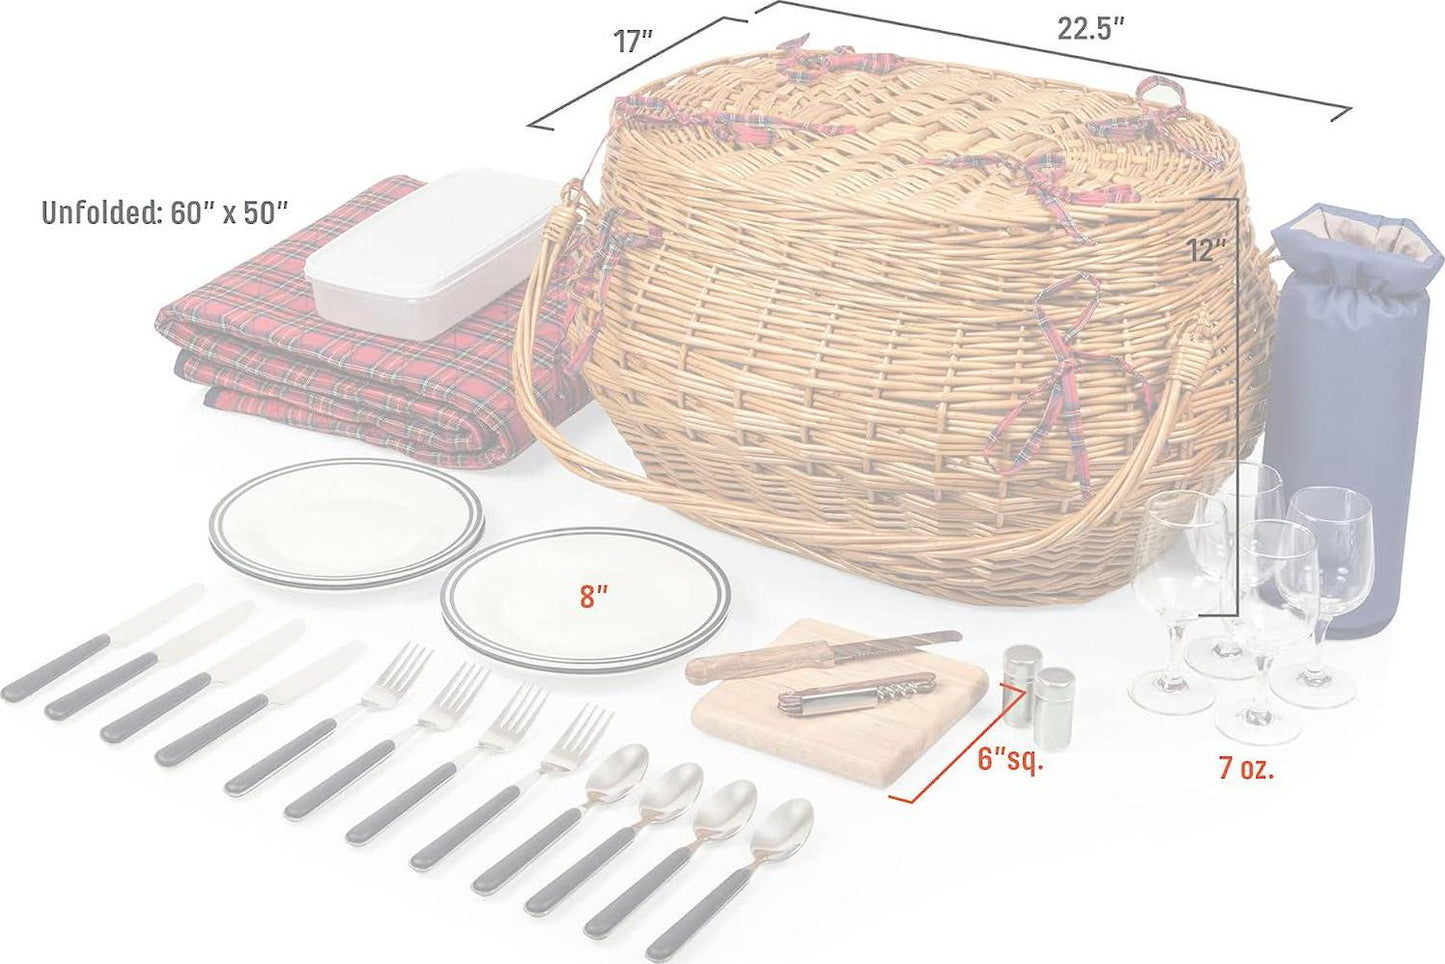 PICNIC TIME Highlander Deluxe Wicker Picnic Basket for 4 with Blanket and Wine Bag, One Size, Red and Blue Tartan Pattern